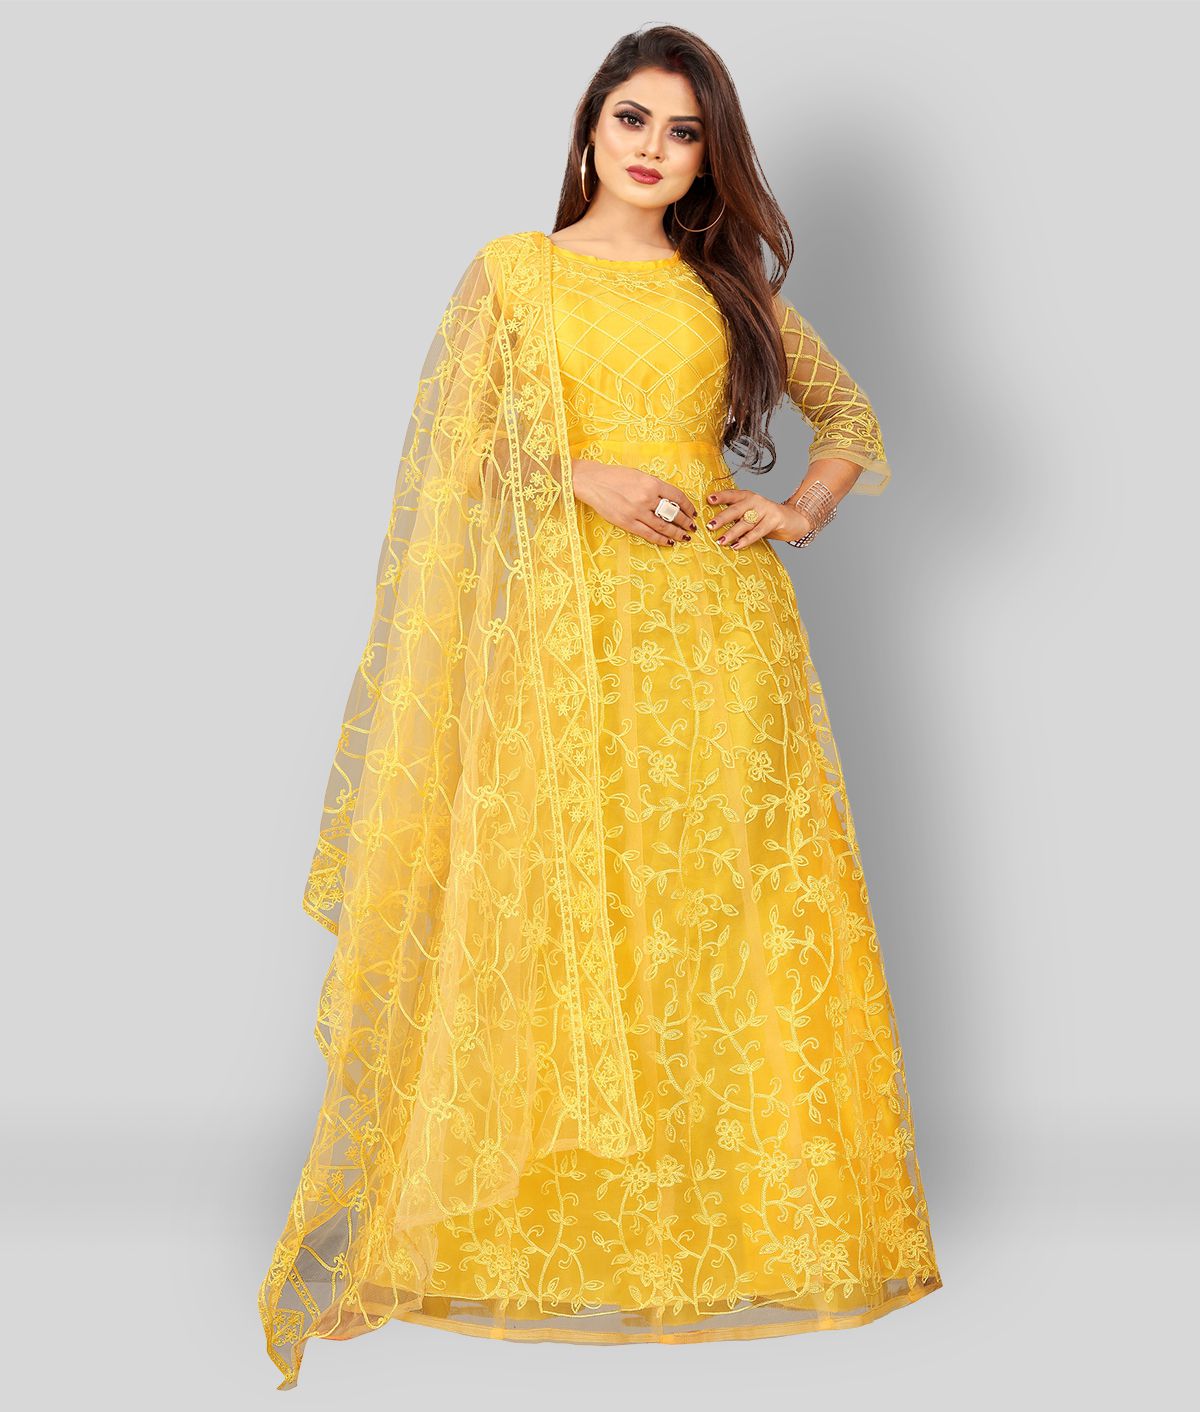     			Aika - Yellow Anarkali Net Women's Semi Stitched Ethnic Gown ( Pack of 1 )